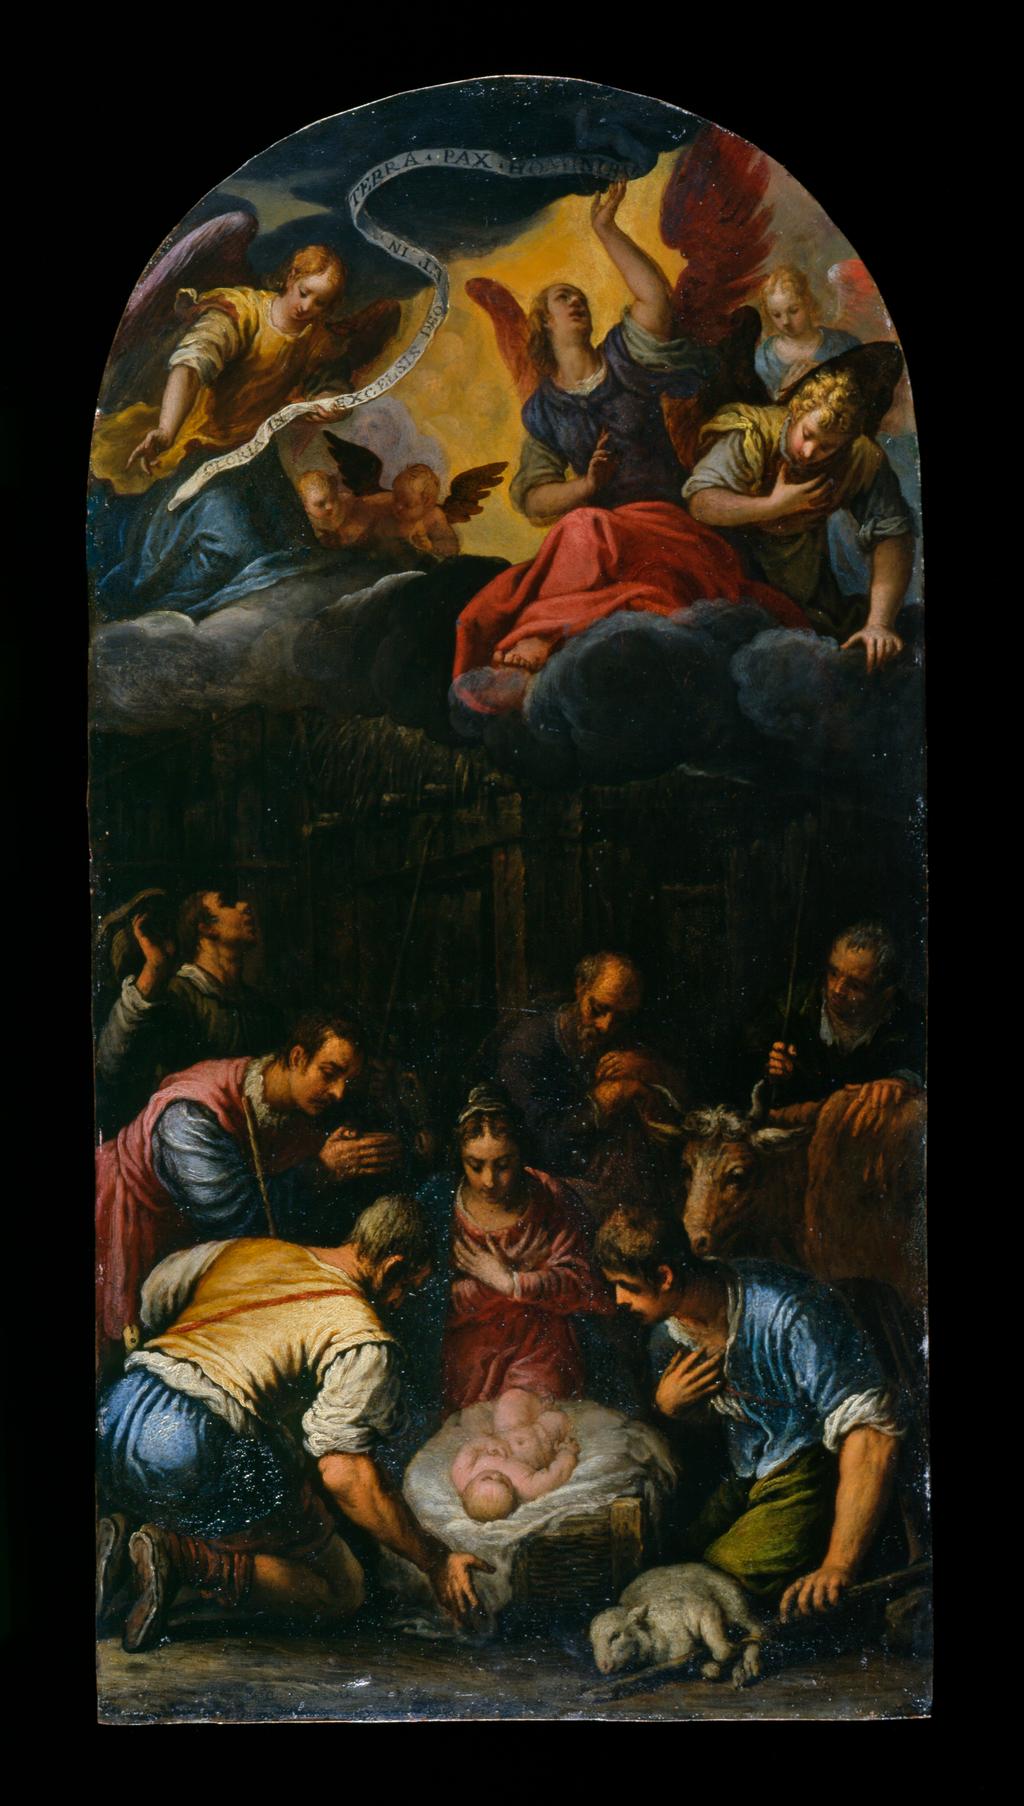 An image of The Adoration of the Shepherds. Turchi, Alessandro (Orbetto), (Italian,1578-1649). Oil on copper, height 47.4c m, width 23.4 cm, 1600-1610. Acquisition Credit: The National Art Collections Fund (The Vera and Aileen Woodroffe Bequest).